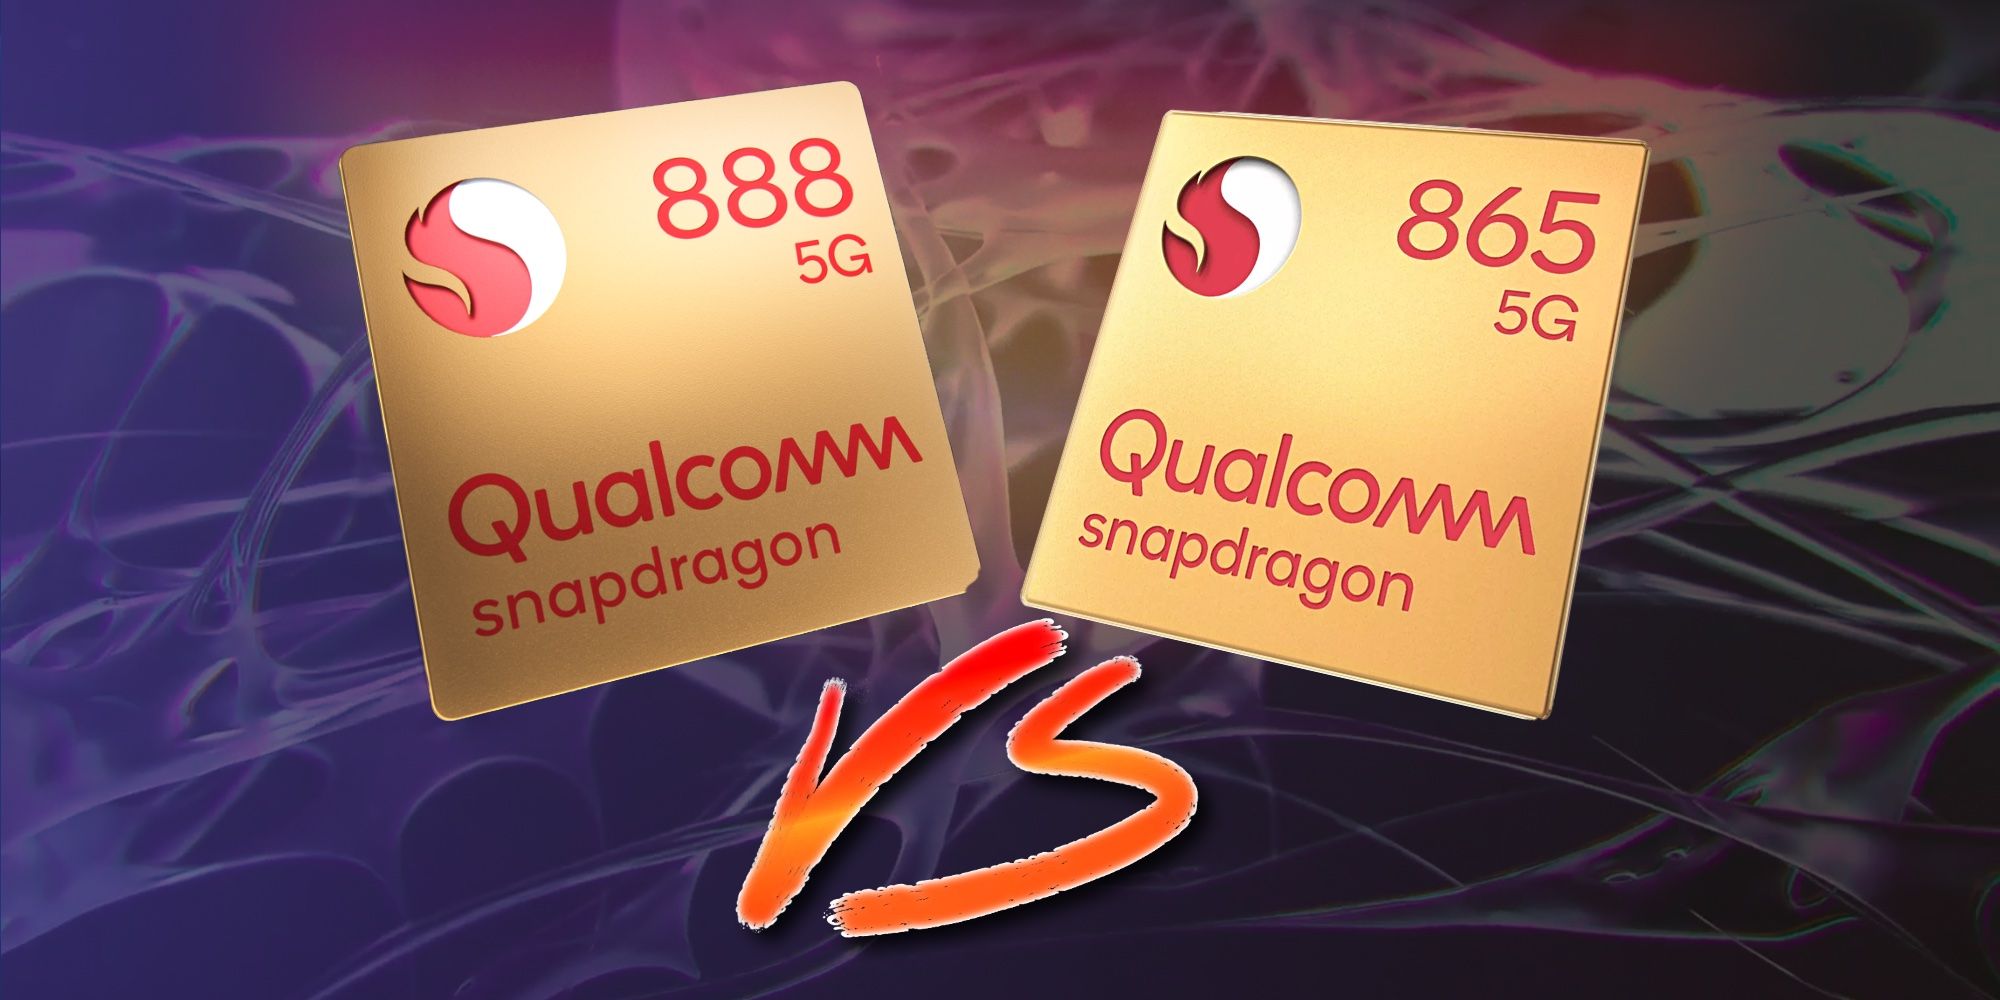 Snapdragon 888 Vs 865 What’s New Different & Improved Explained